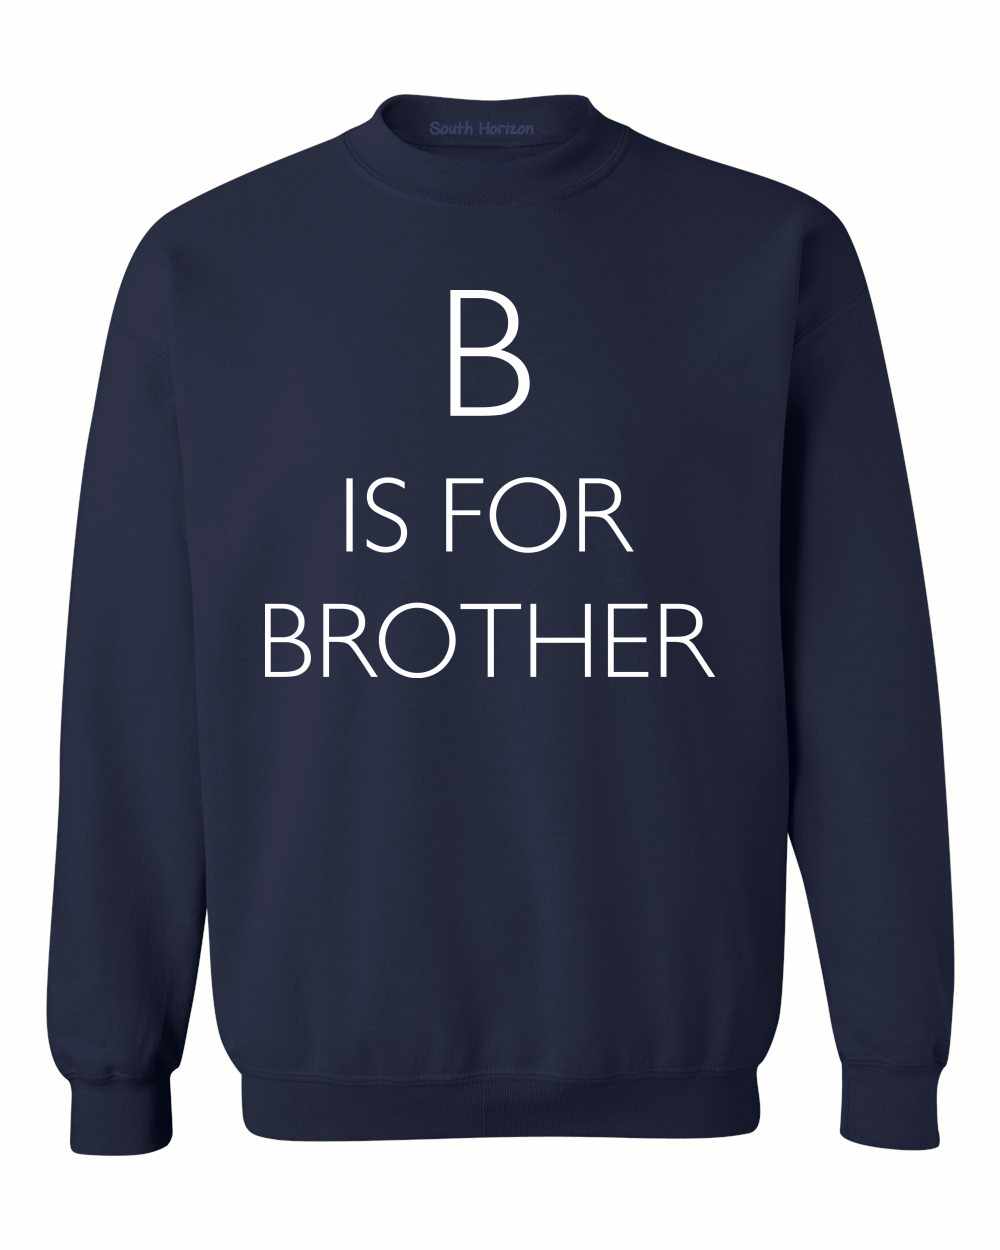 B is for Brother on SweatShirt (#1009-11)